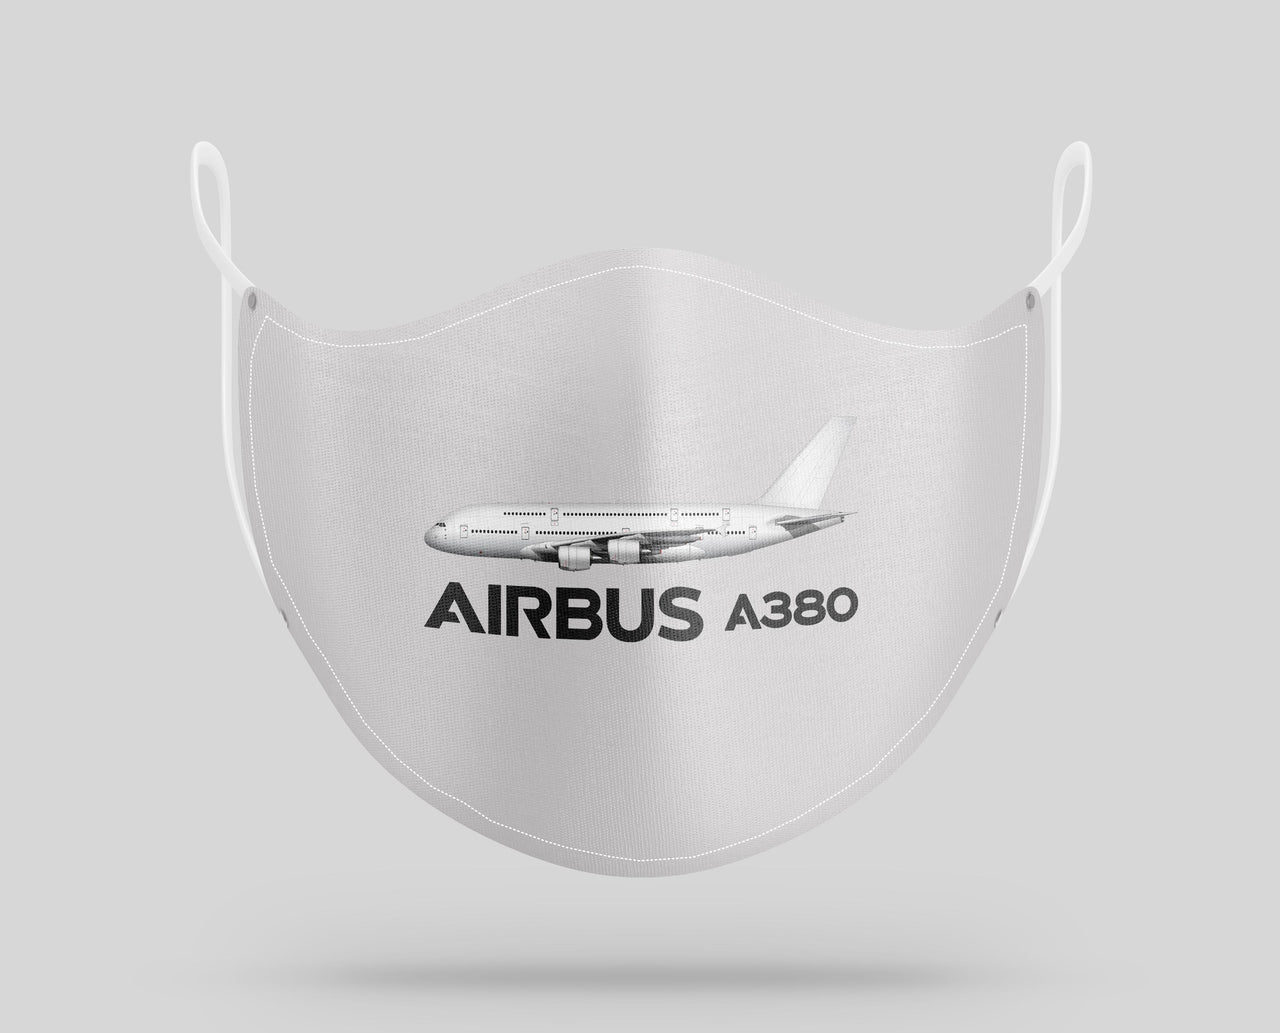 The Airbus A380 Designed Face Masks